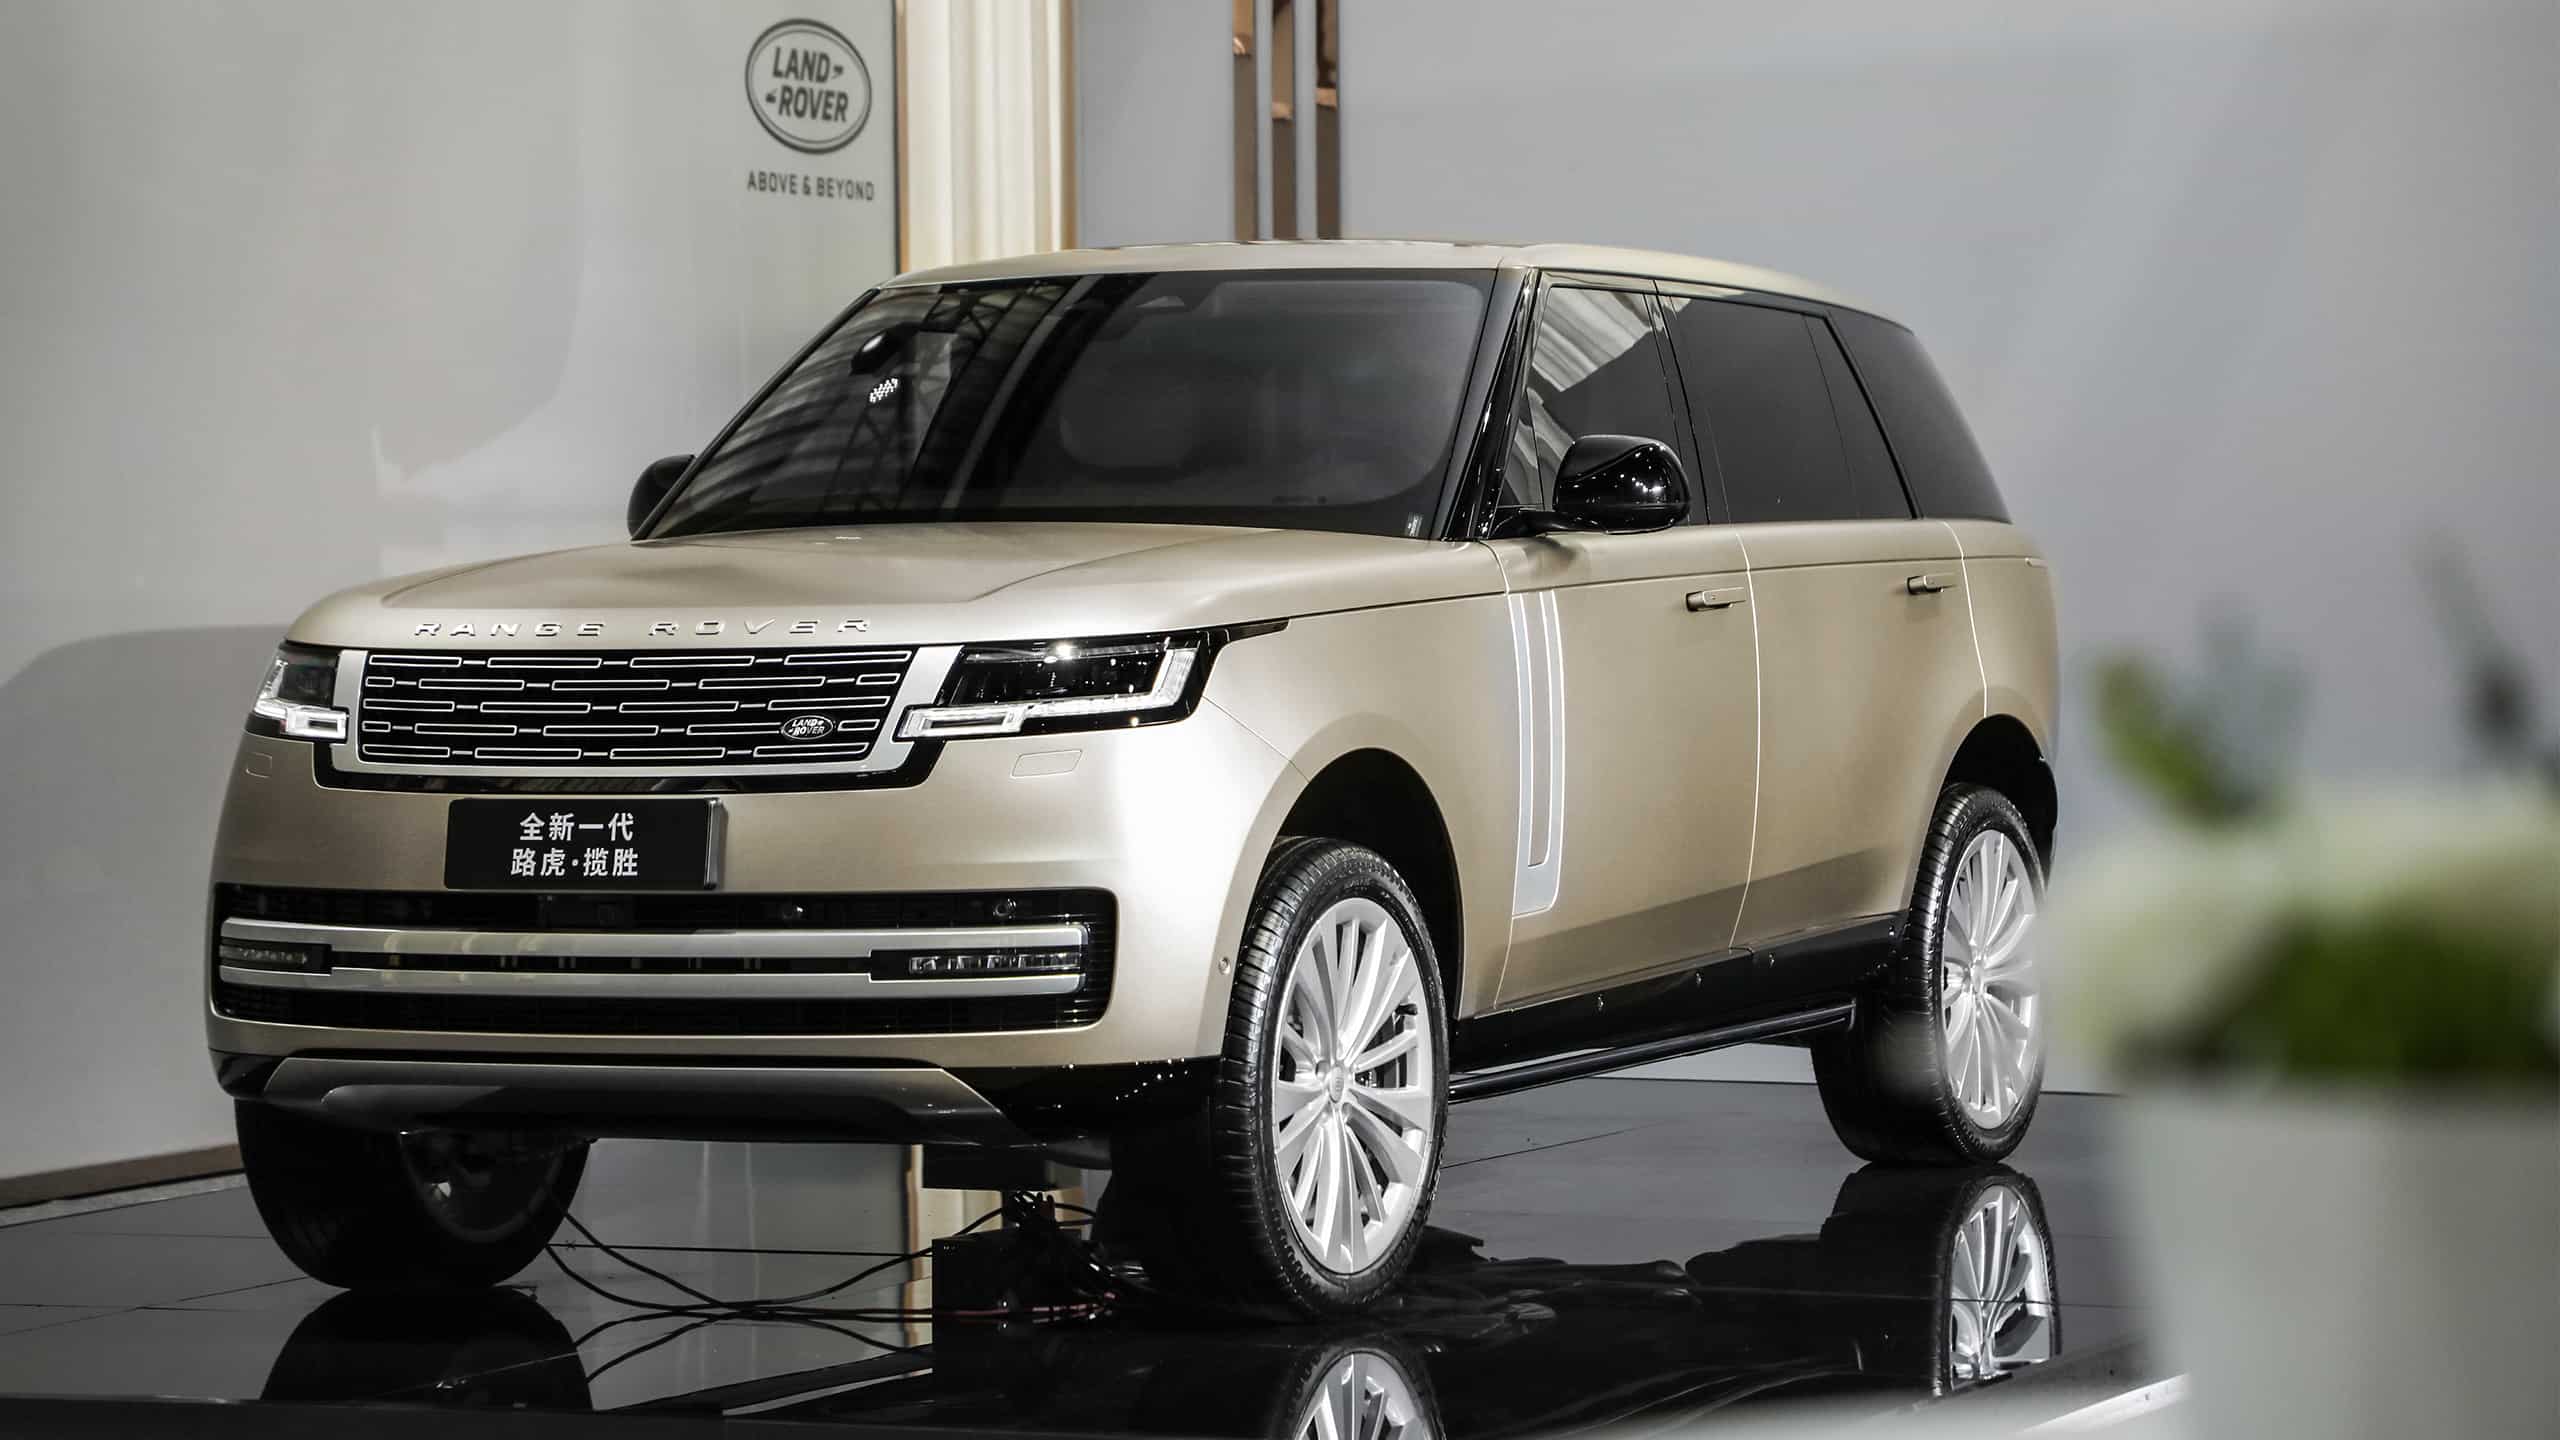 New Range Rover in the event